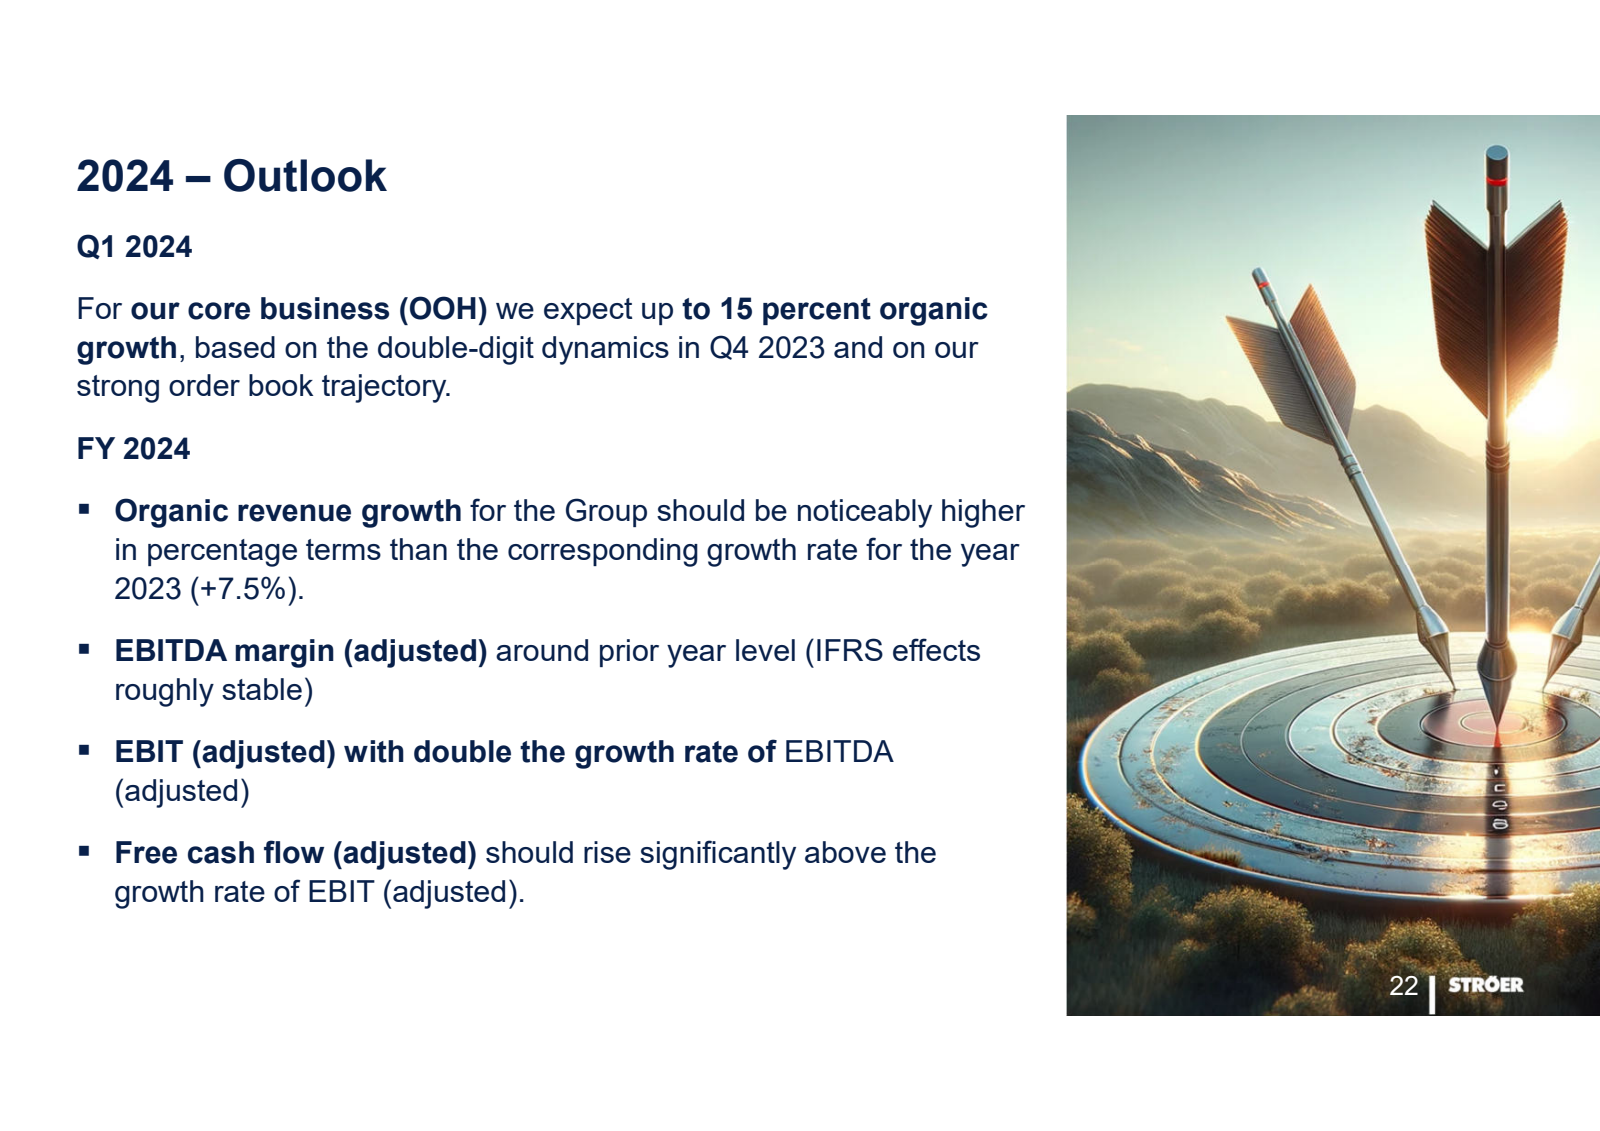 2024 - Outlook 

Q1 